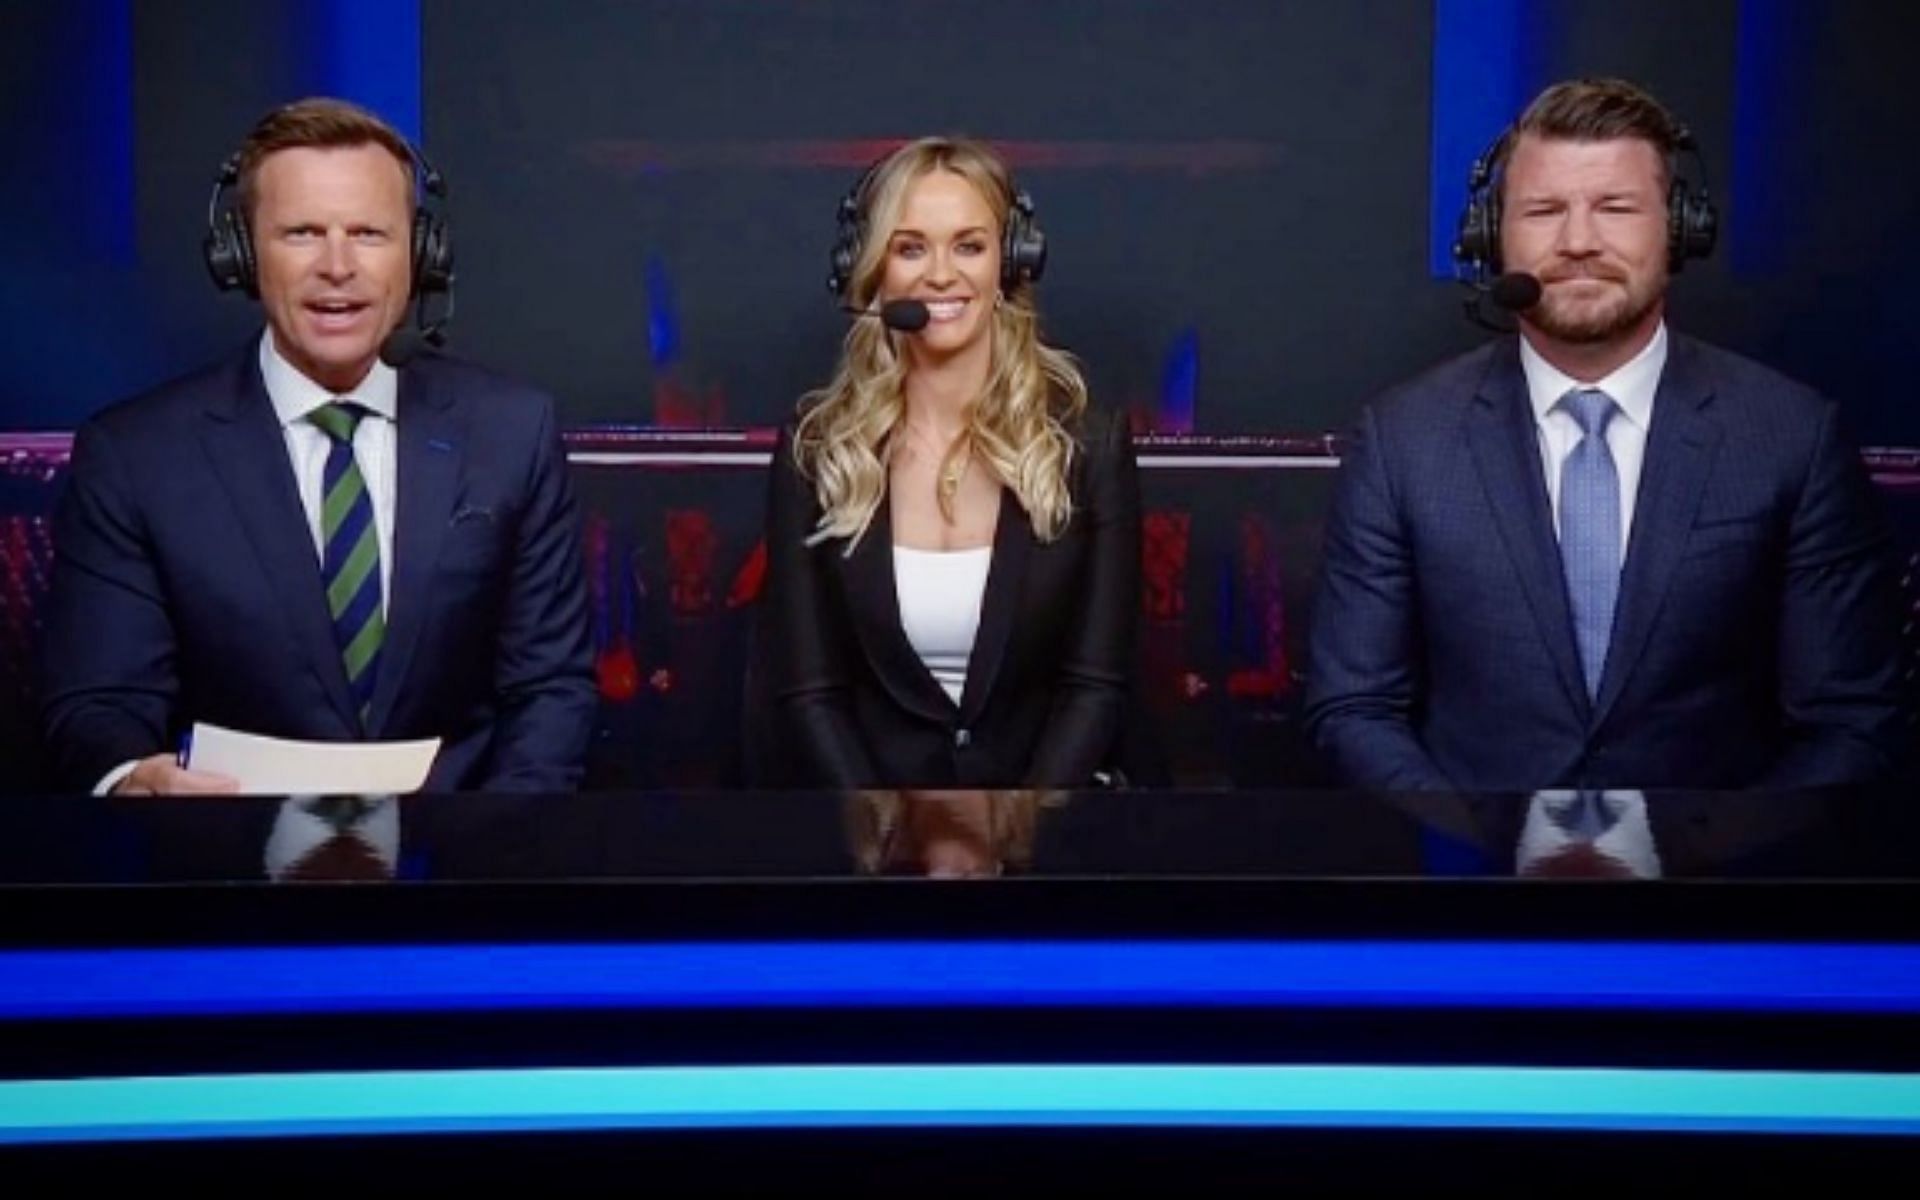 Laura Sanko (center) on the Dana White&#039;s Contender Series commentary desk with her colleagues Dan Hellie (left) and Michael Bisping (right) [Image Credit: via @laura_sanko on Instagram]